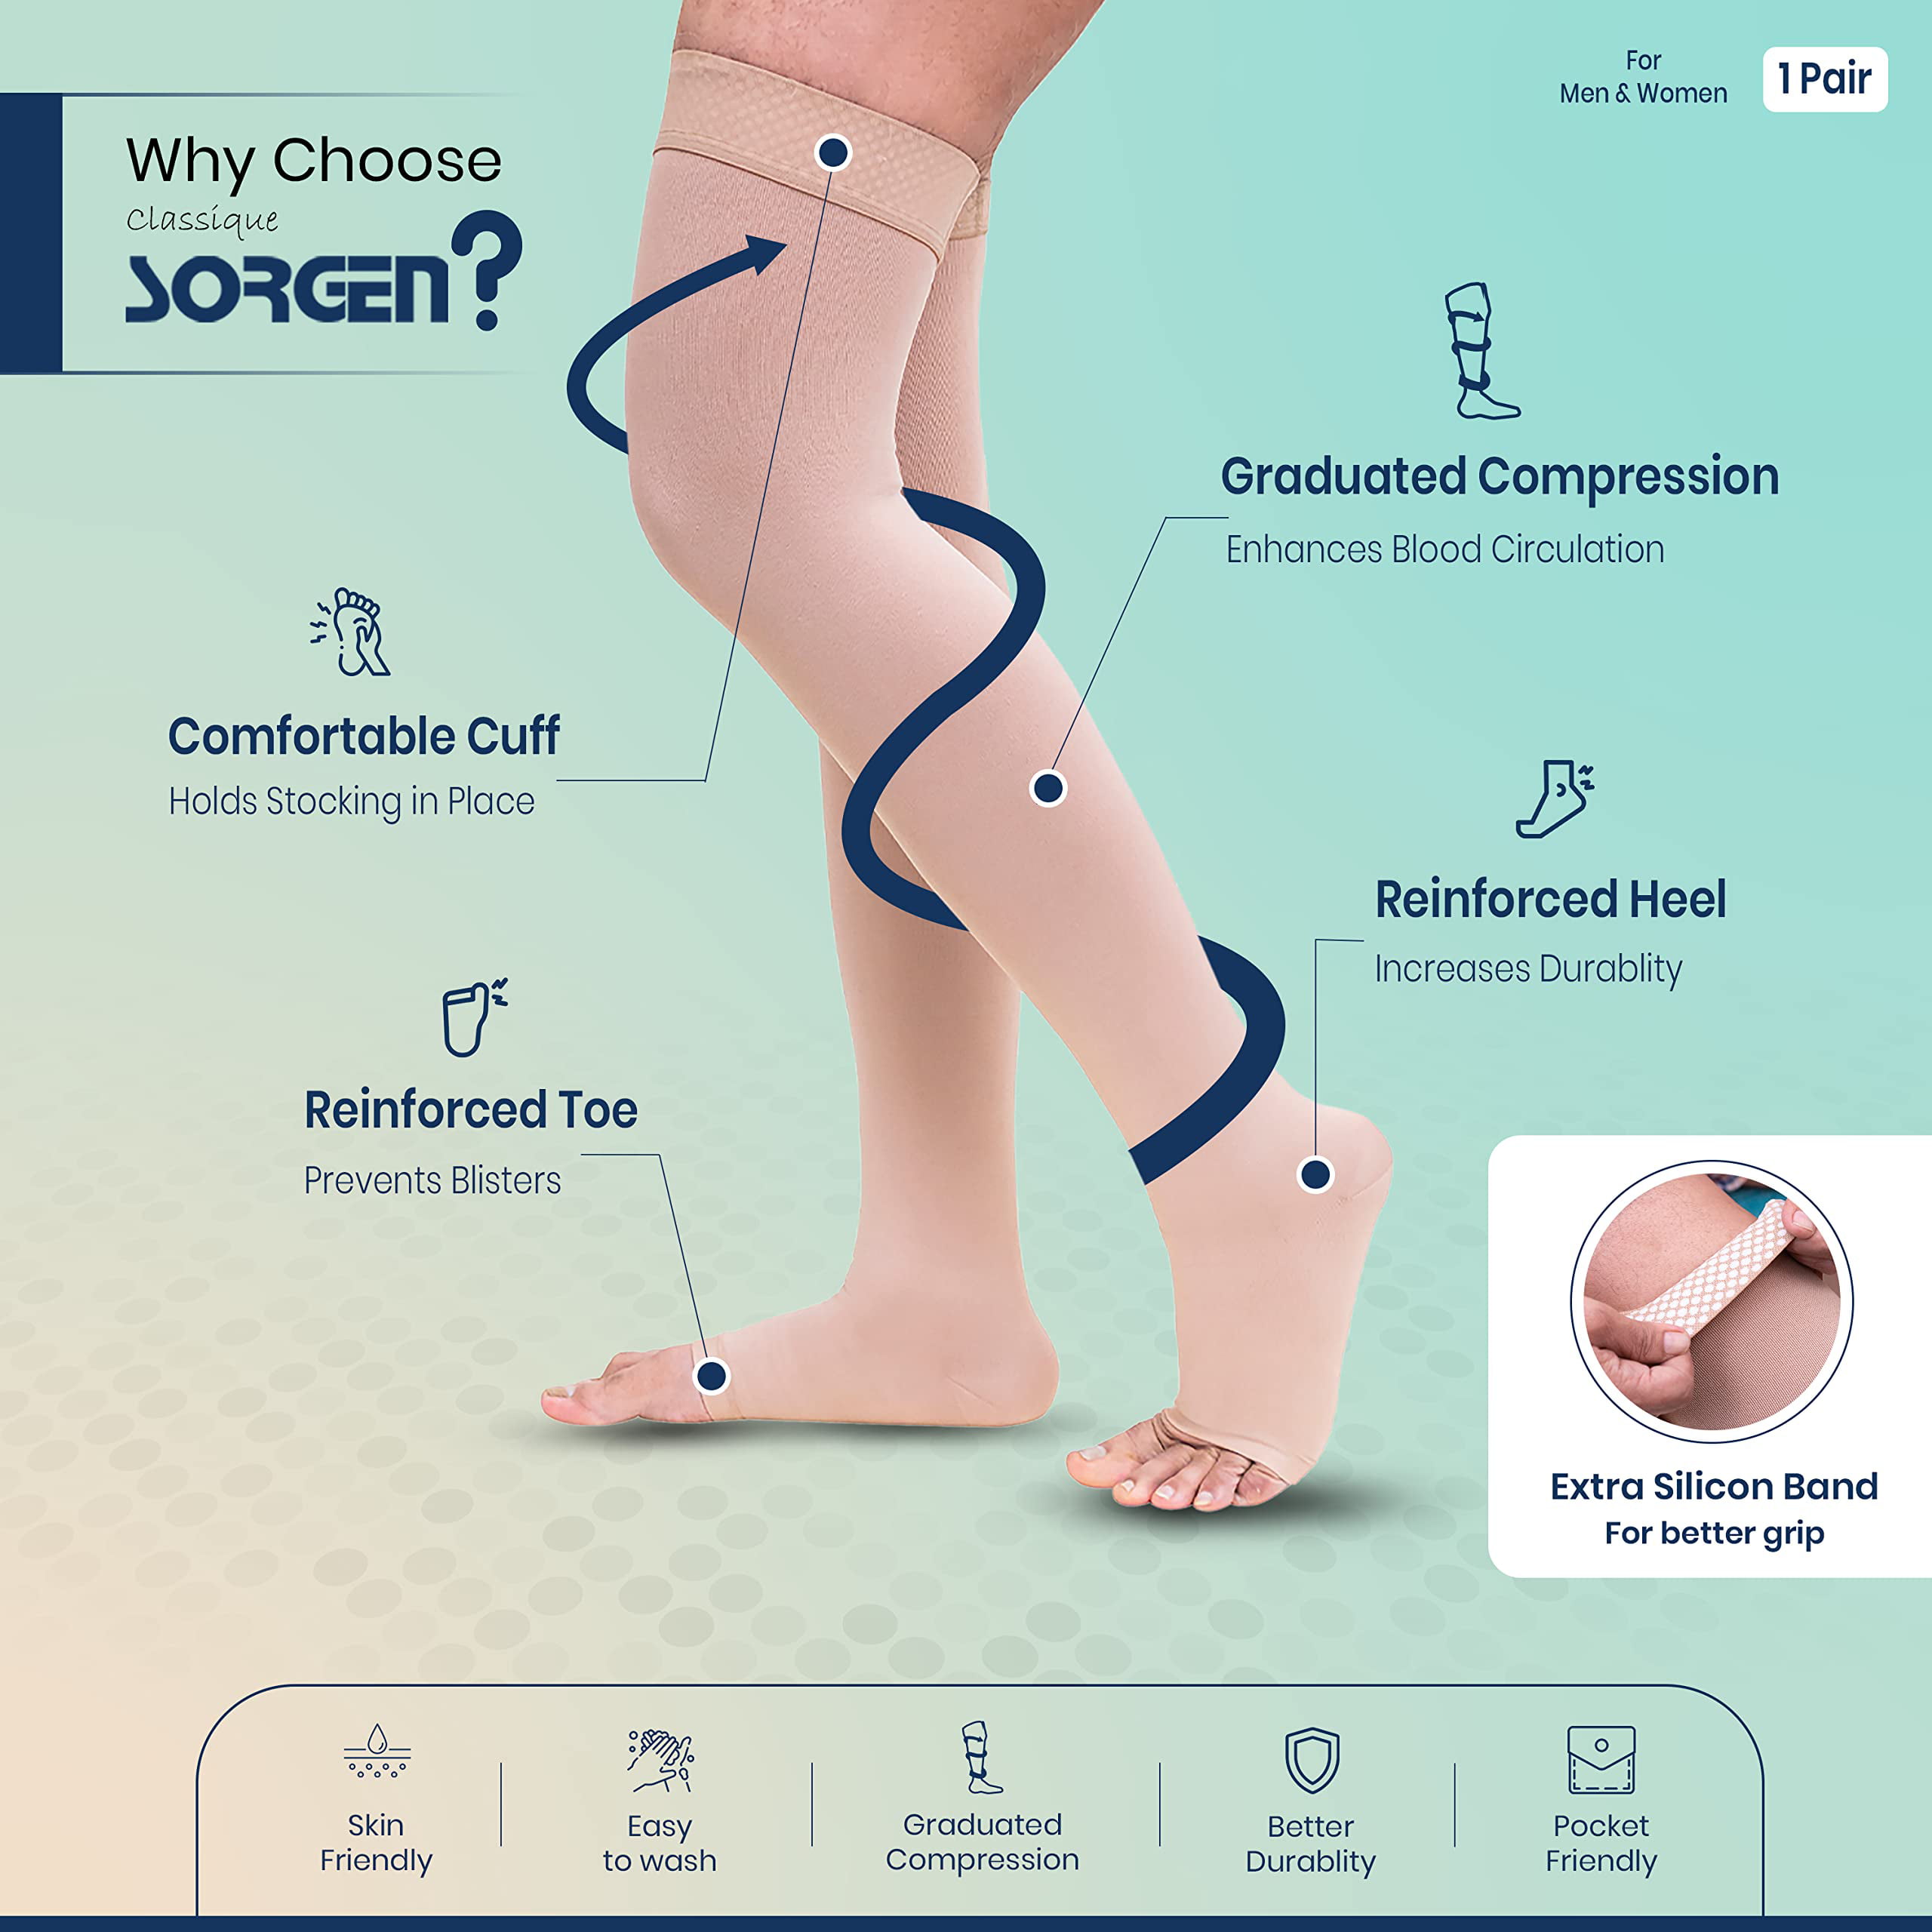 Sorgen Classique (Lycra)Compression Stockings For Varicose Veins Class 2  Thigh Length Small